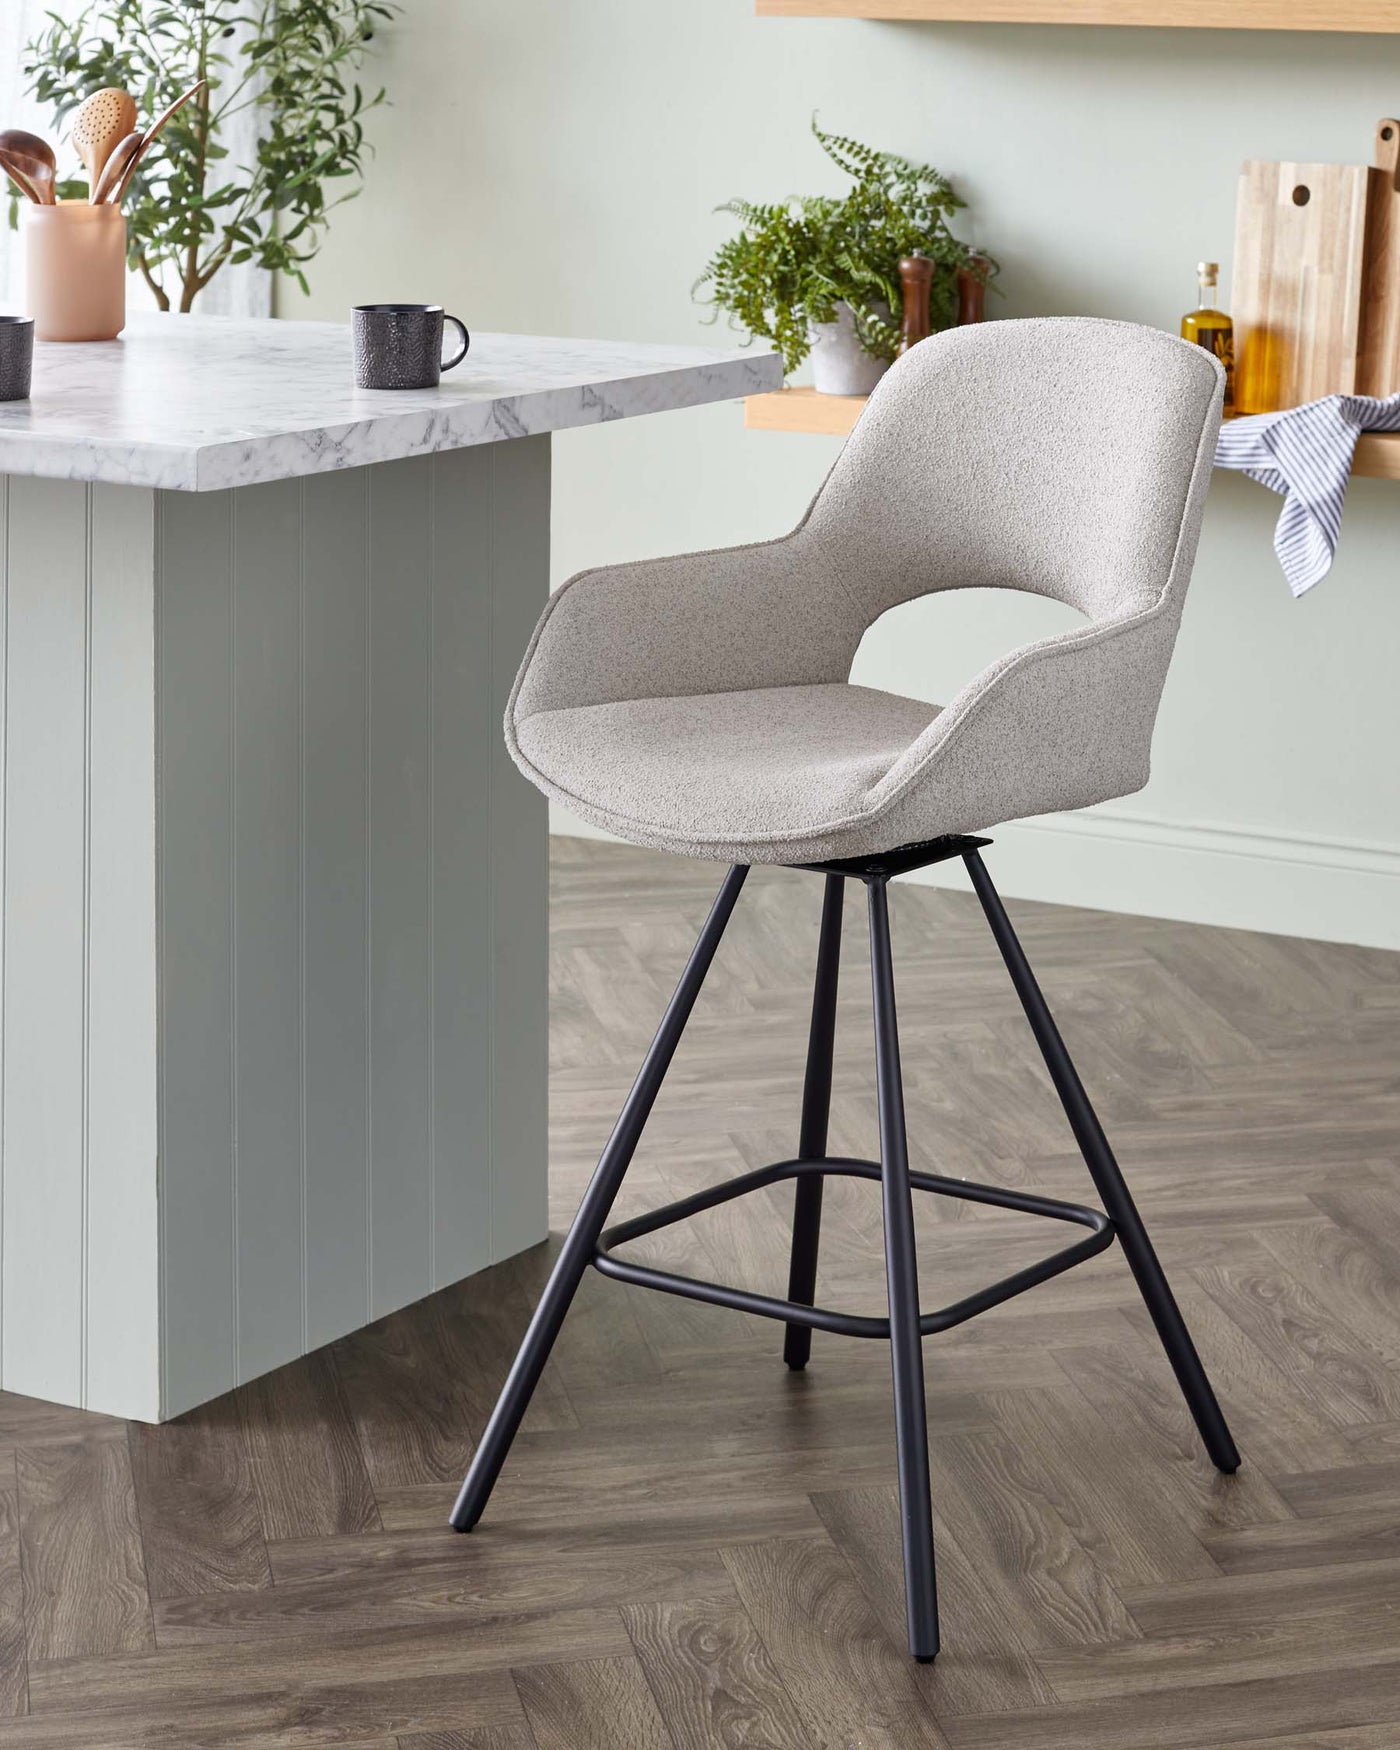 Modern bar stool with a textured light grey fabric upholstery and an ergonomic curved design. It features a swivel seat, armrests, and is supported by a slim, black metal frame with four slanted legs and a circular footrest. The chair is positioned by a kitchen counter with a marble top, showcasing a sophisticated and contemporary style suitable for kitchen or bar areas.